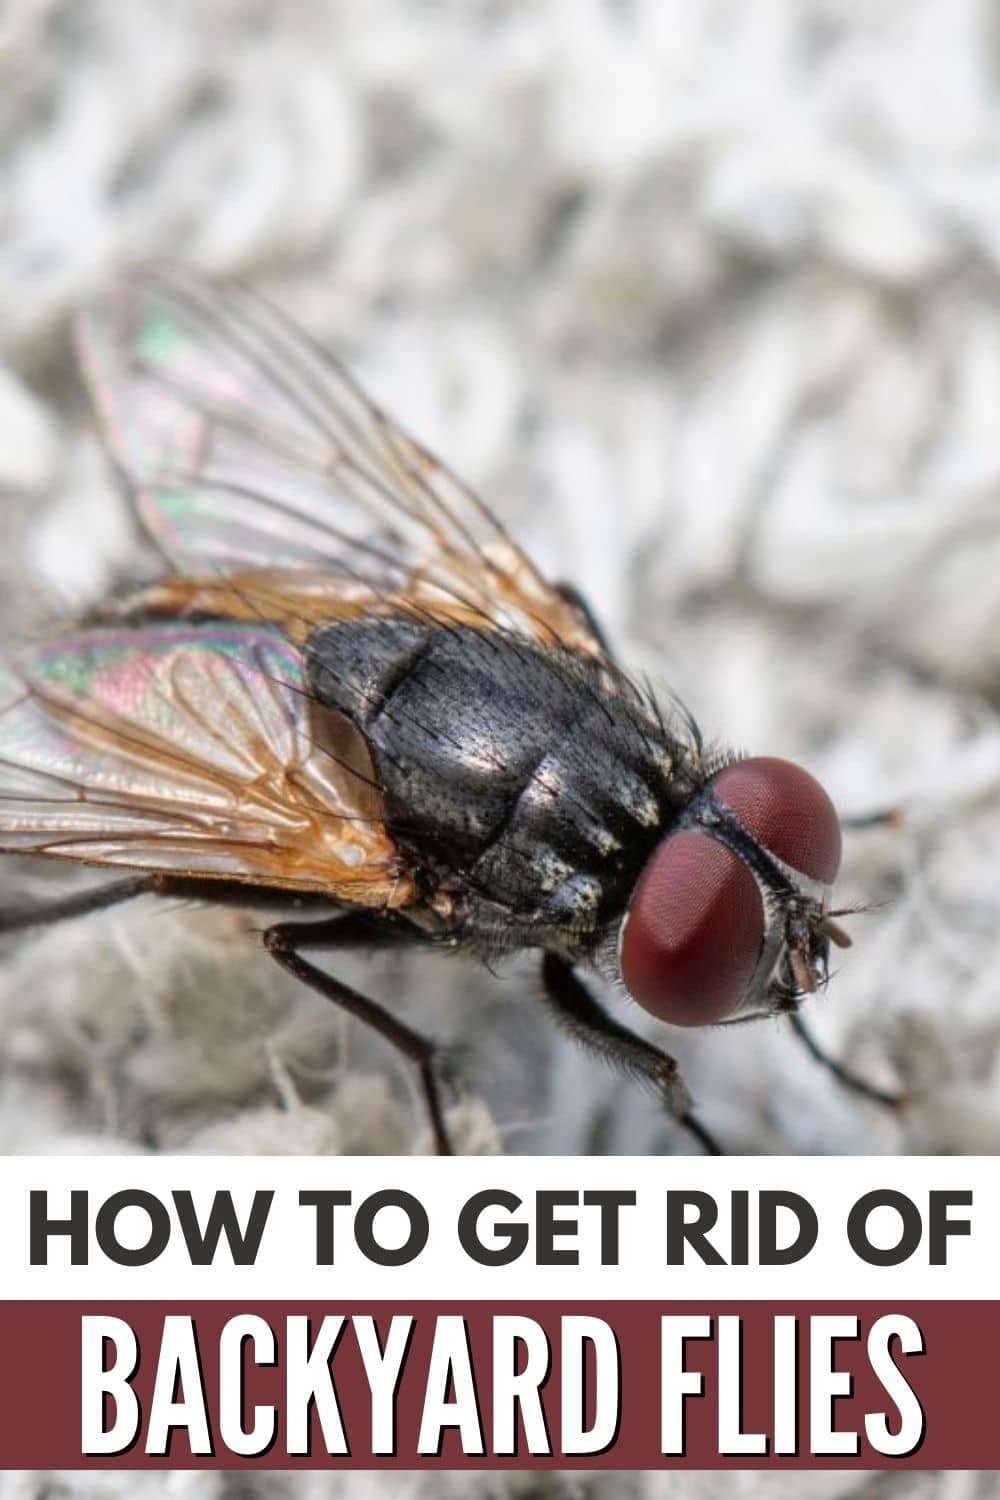 Discover effective methods to eliminate backyard flies using proven techniques.